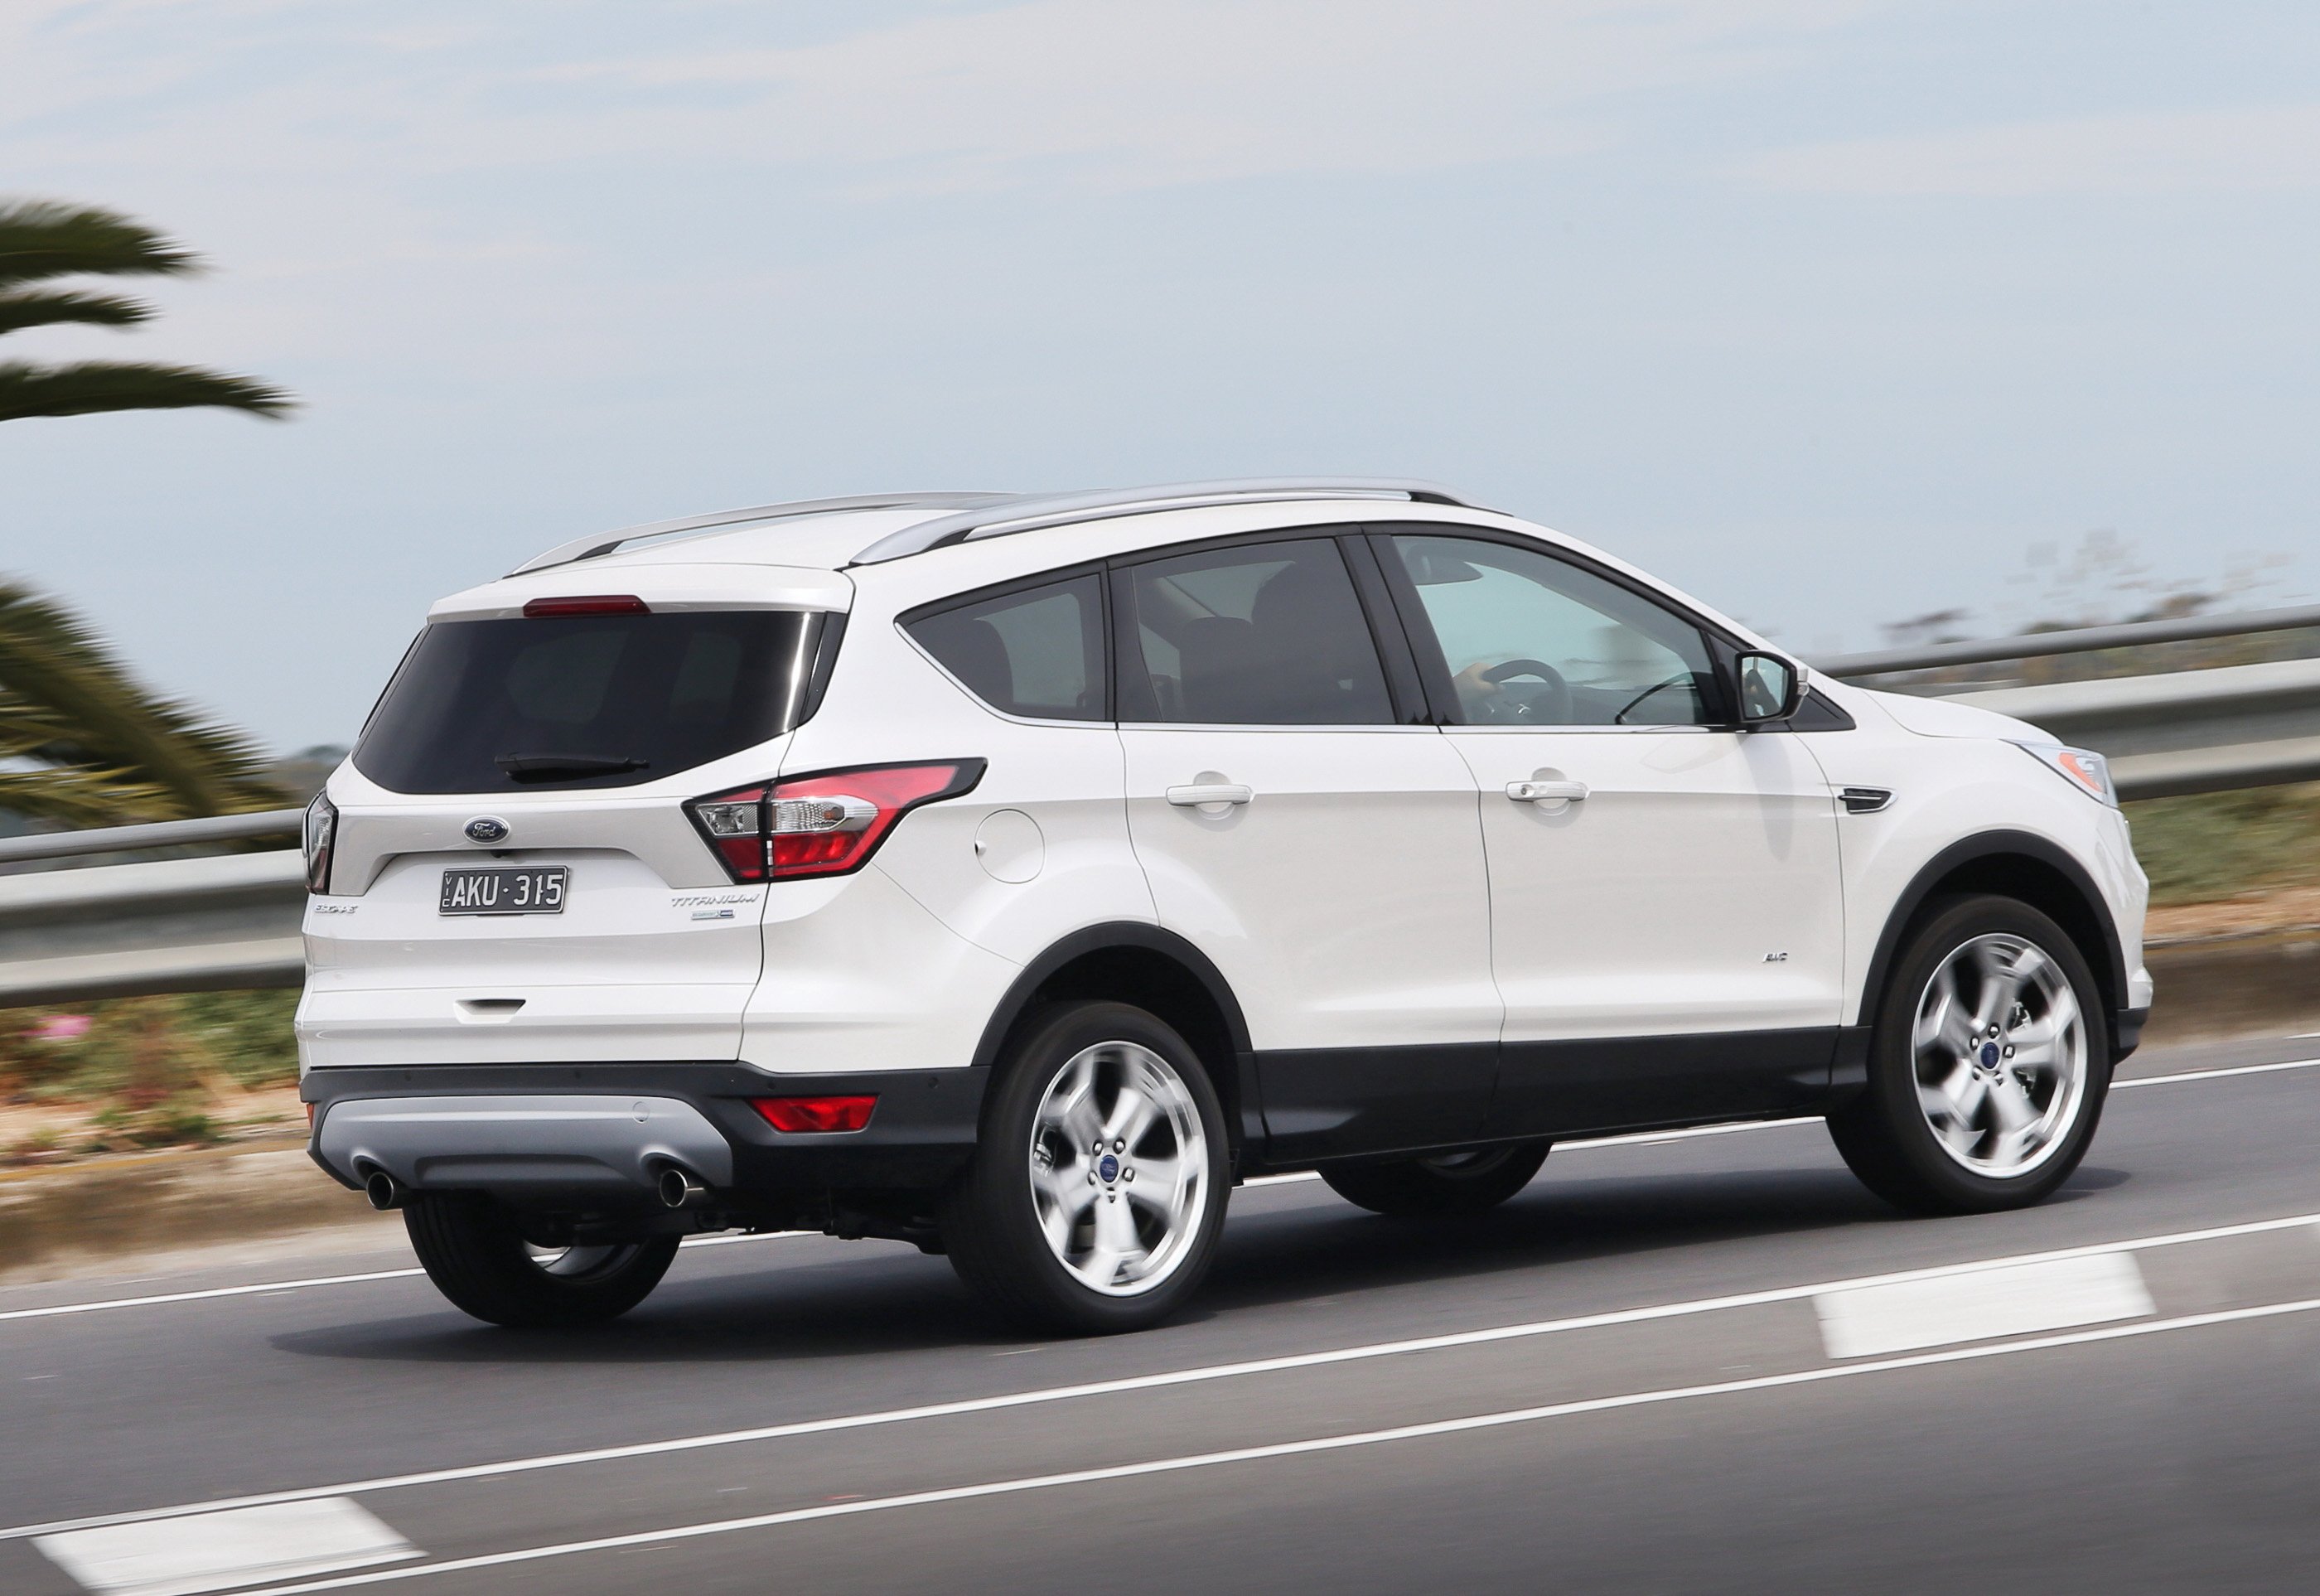 2017 Ford Escape review: Quick drive | CarAdvice